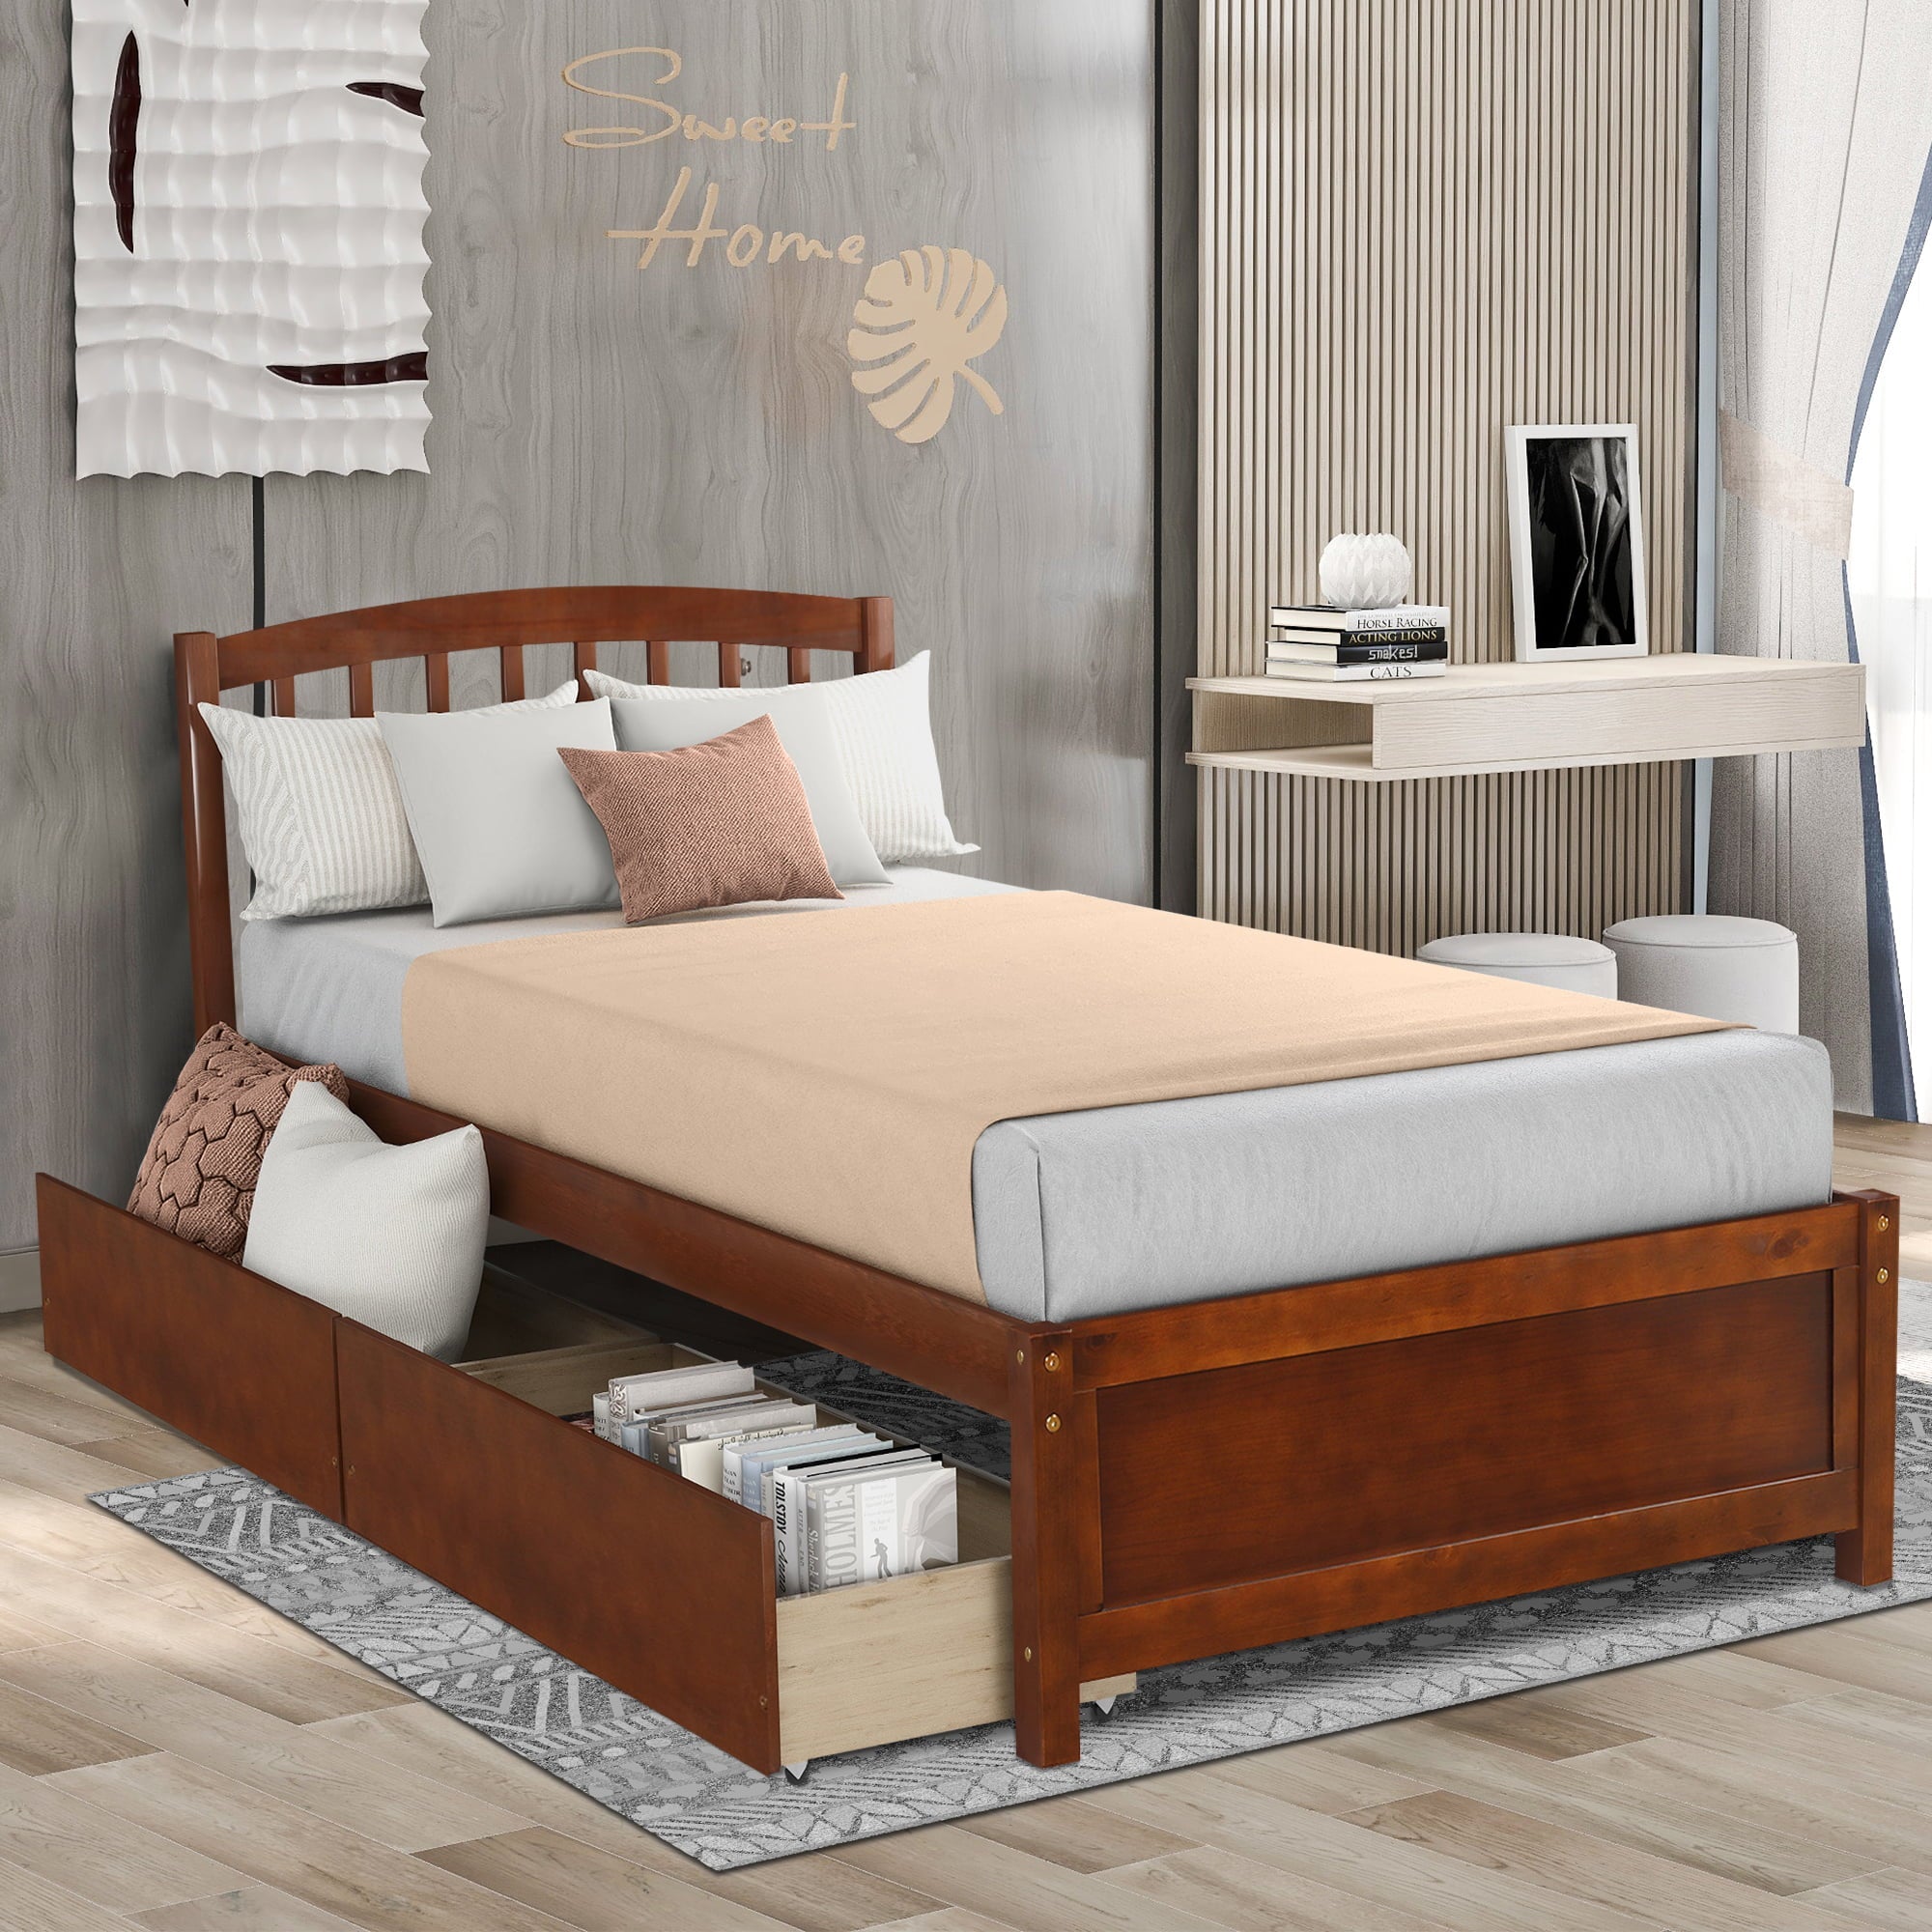 Twin Platform Bed Frame with Storage Drawers, Kids Twin Size Bed Frame No Box Spring Needed, Solid Wood Platform Beds with Headboard and Two Drawers, Modern Single Bed Bedroom Furniture, Walnut, J1169